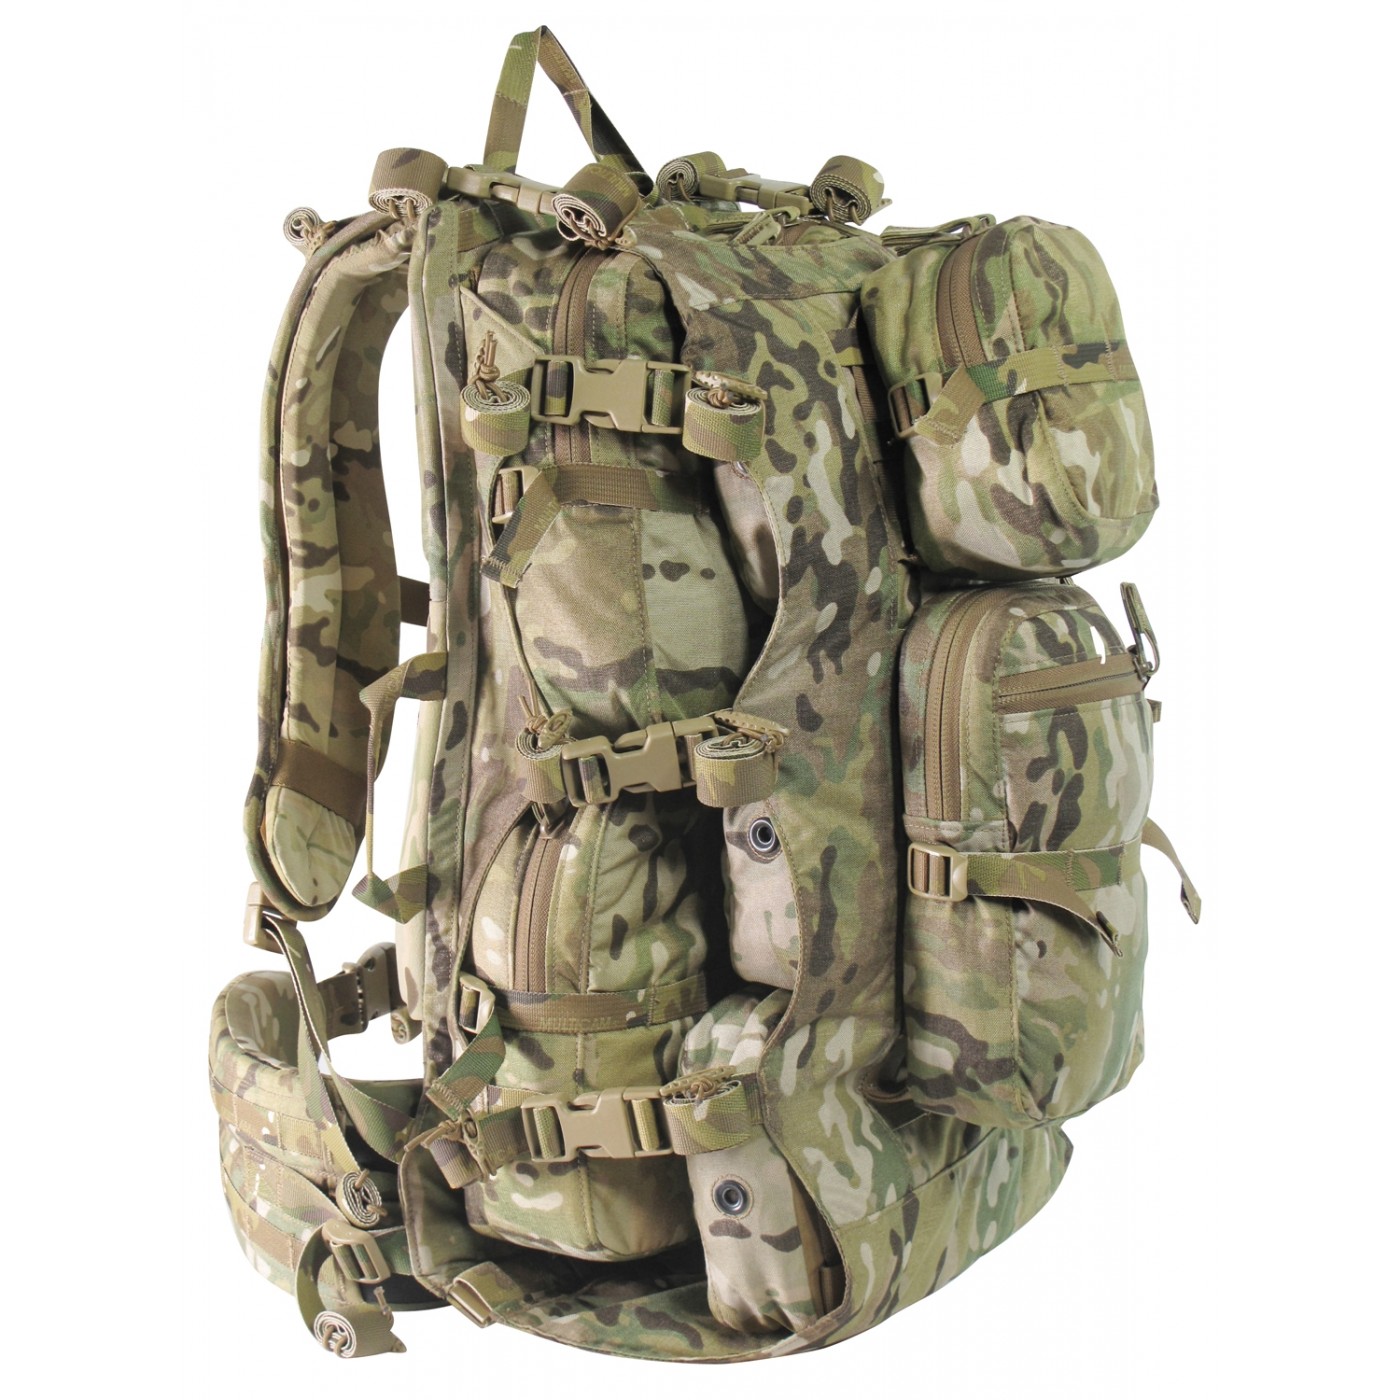 VIKING PATROL MOLLE PACK 60 LITRE BTP ULTIMATE HIGH CAPACITY RECON BAG MILITARY 